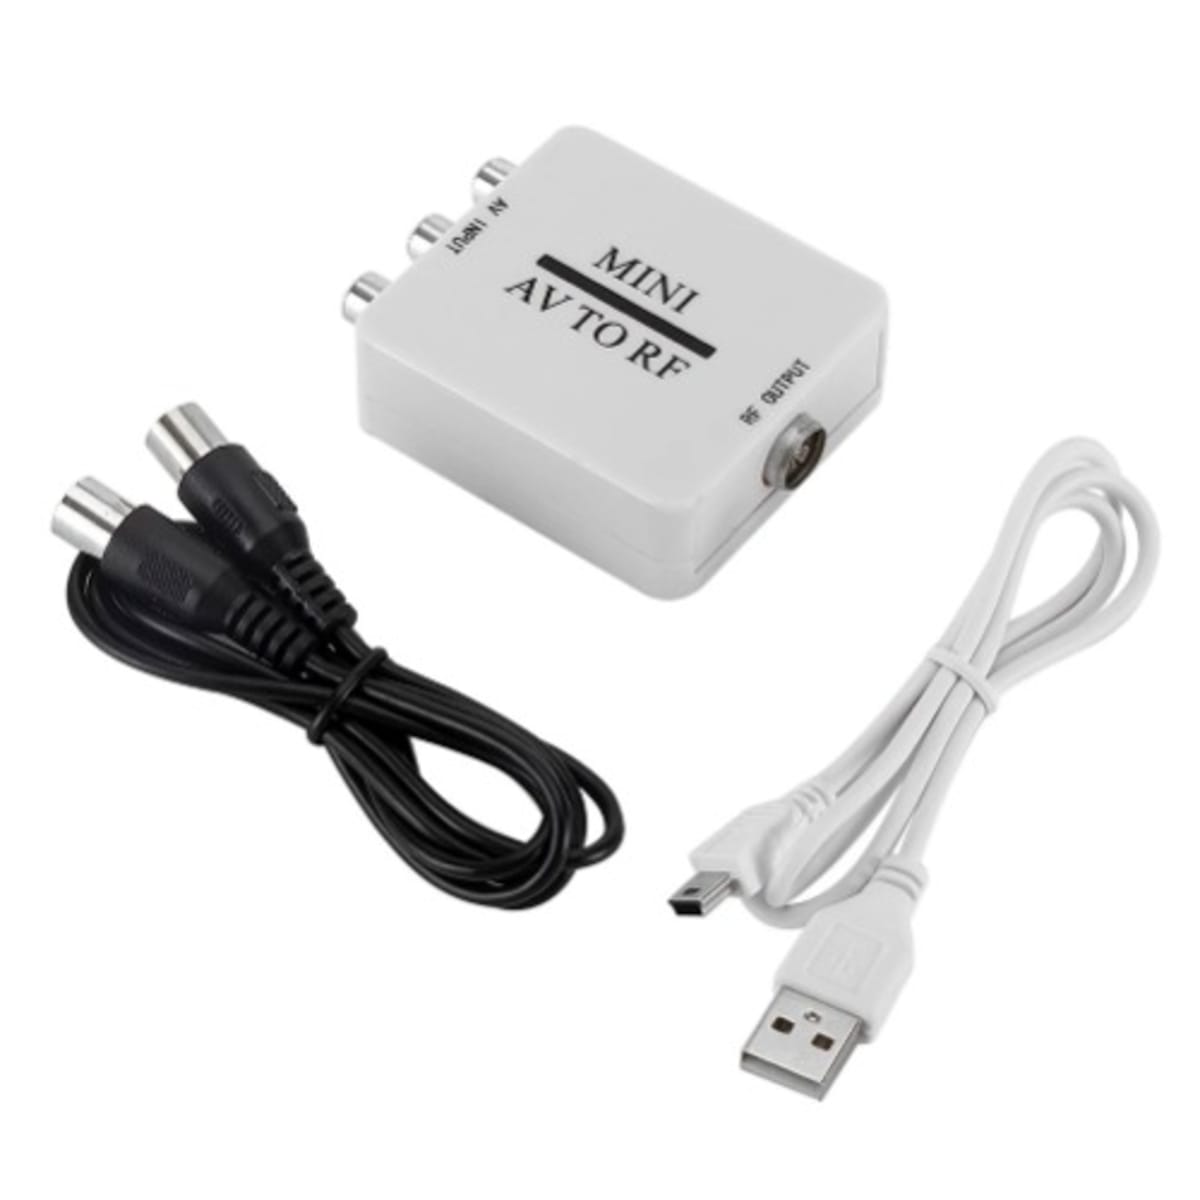 Wholesale Rf Tv Tuner Box Allows Cable, TV, Or Streaming 